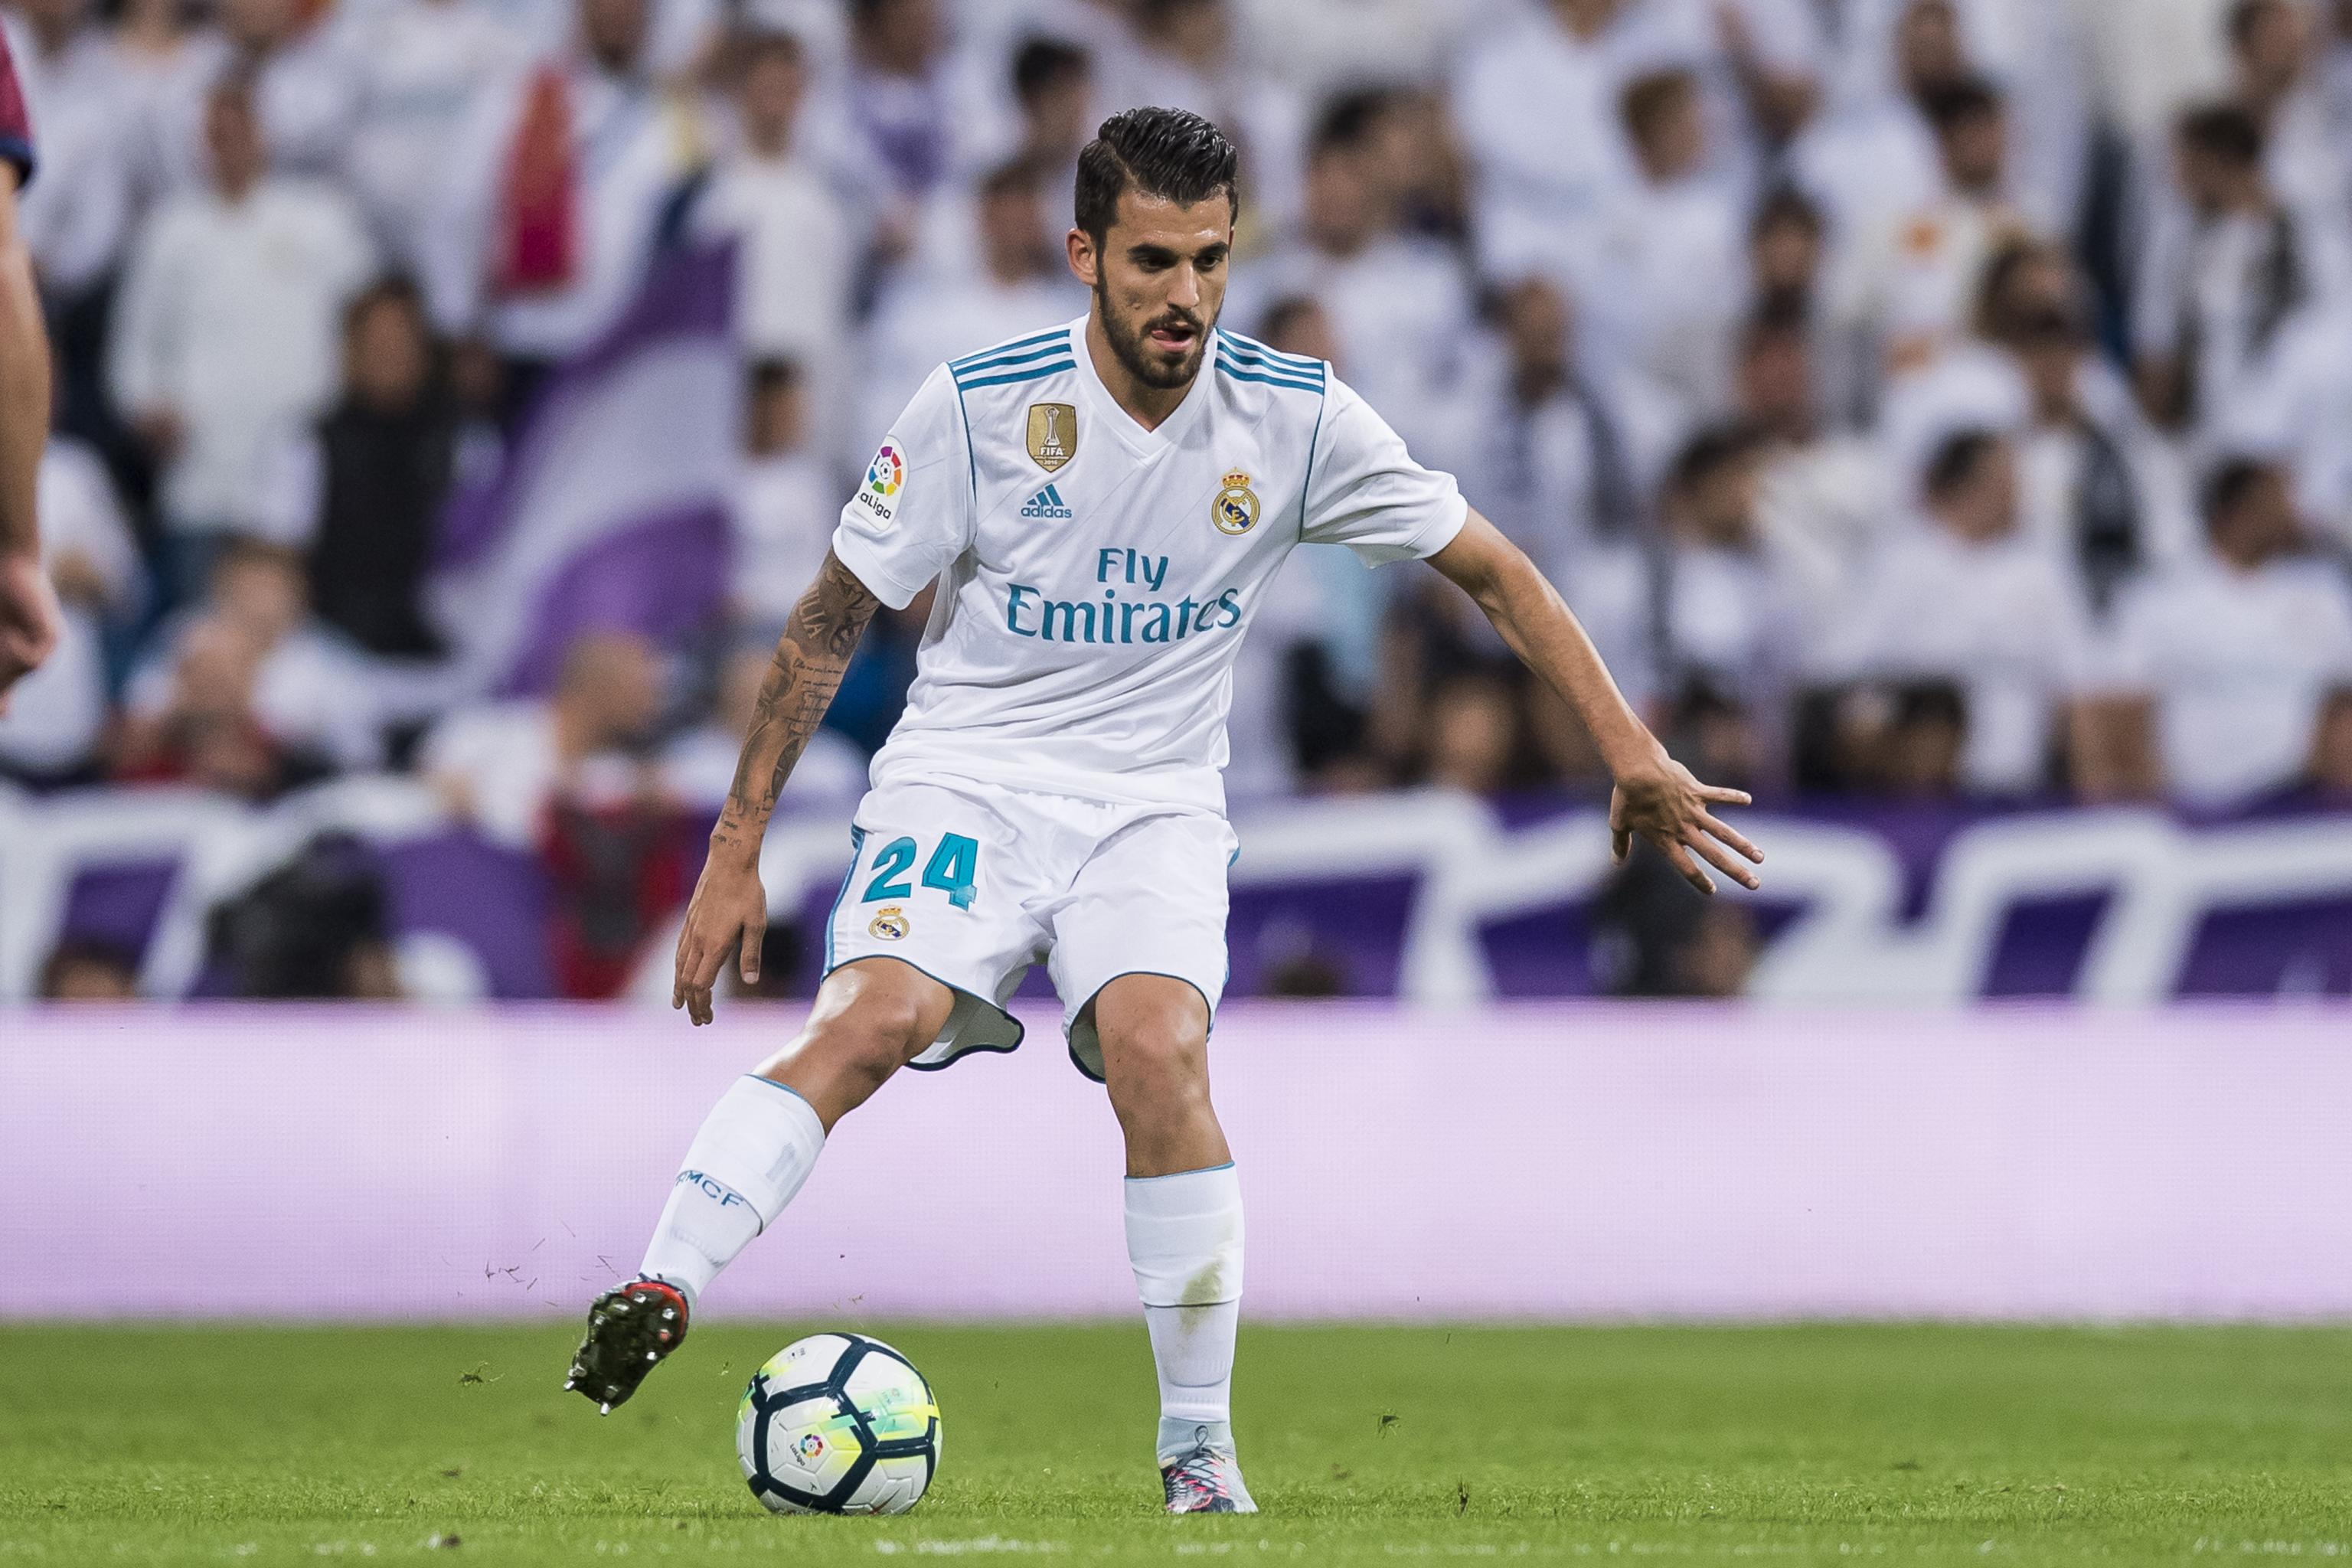 Arsenal, Tottenham Hotspur Reportedly Interested in Real Madrid's Dani Ceballos | Bleacher Report | Latest News, Videos and Highlights